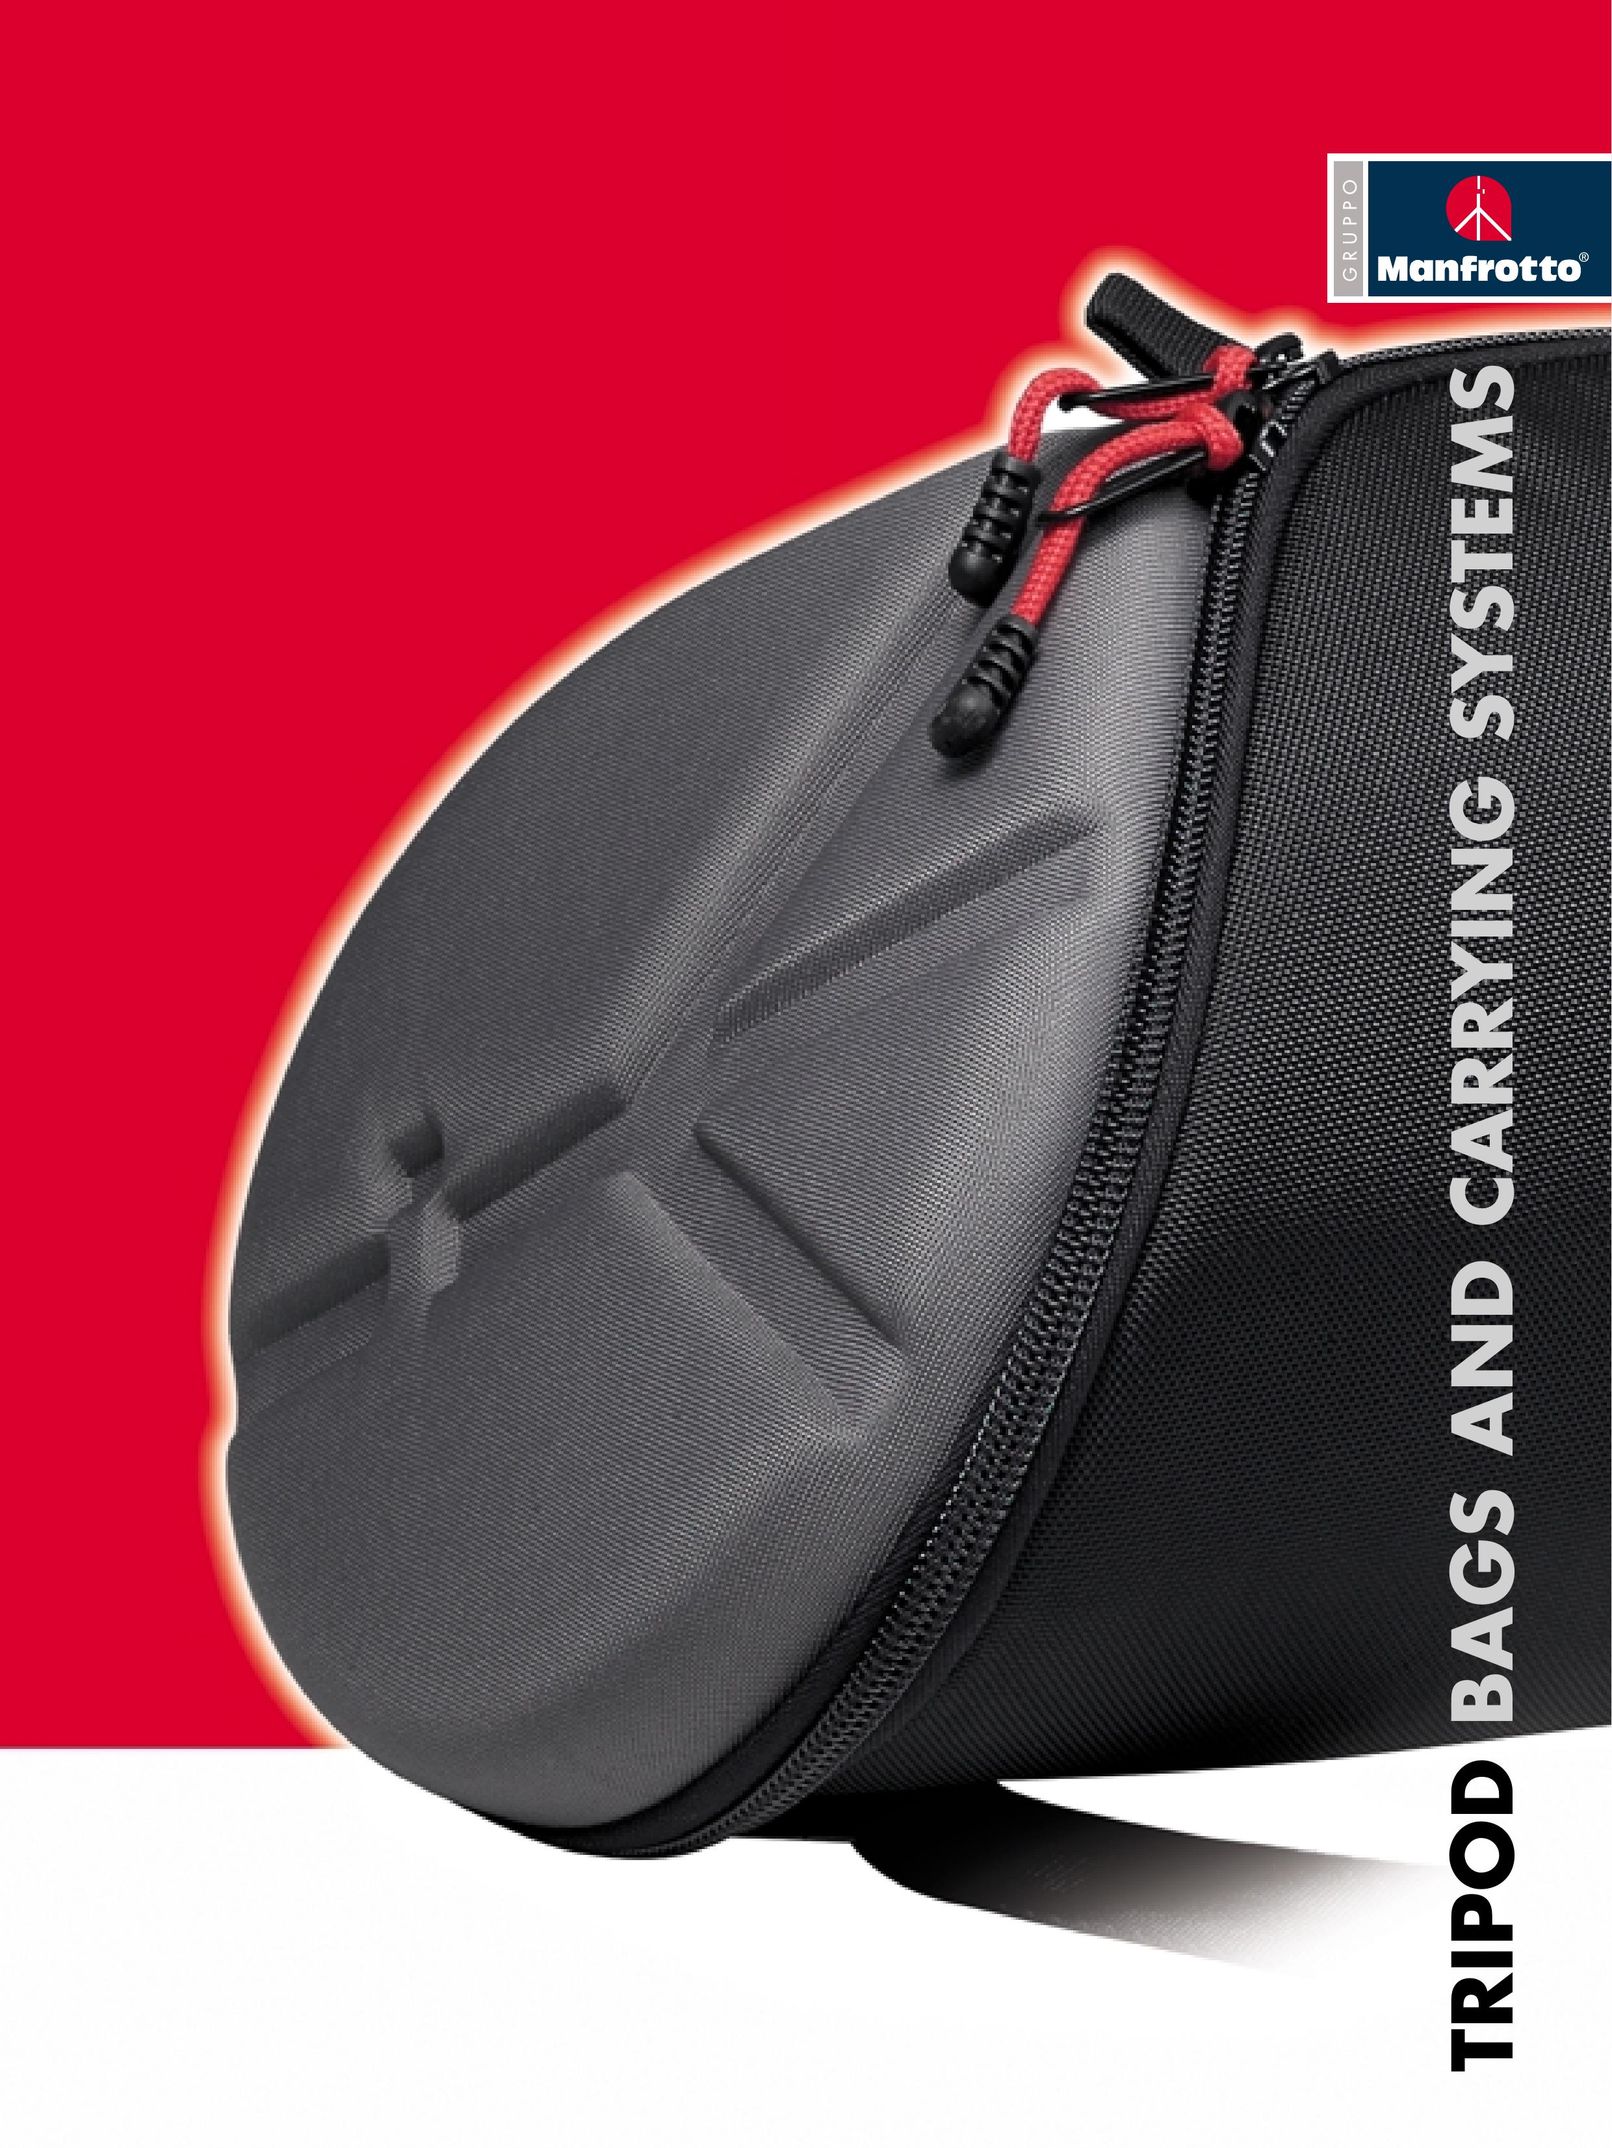 Manfrotto MBAG80 Carrying Case User Manual